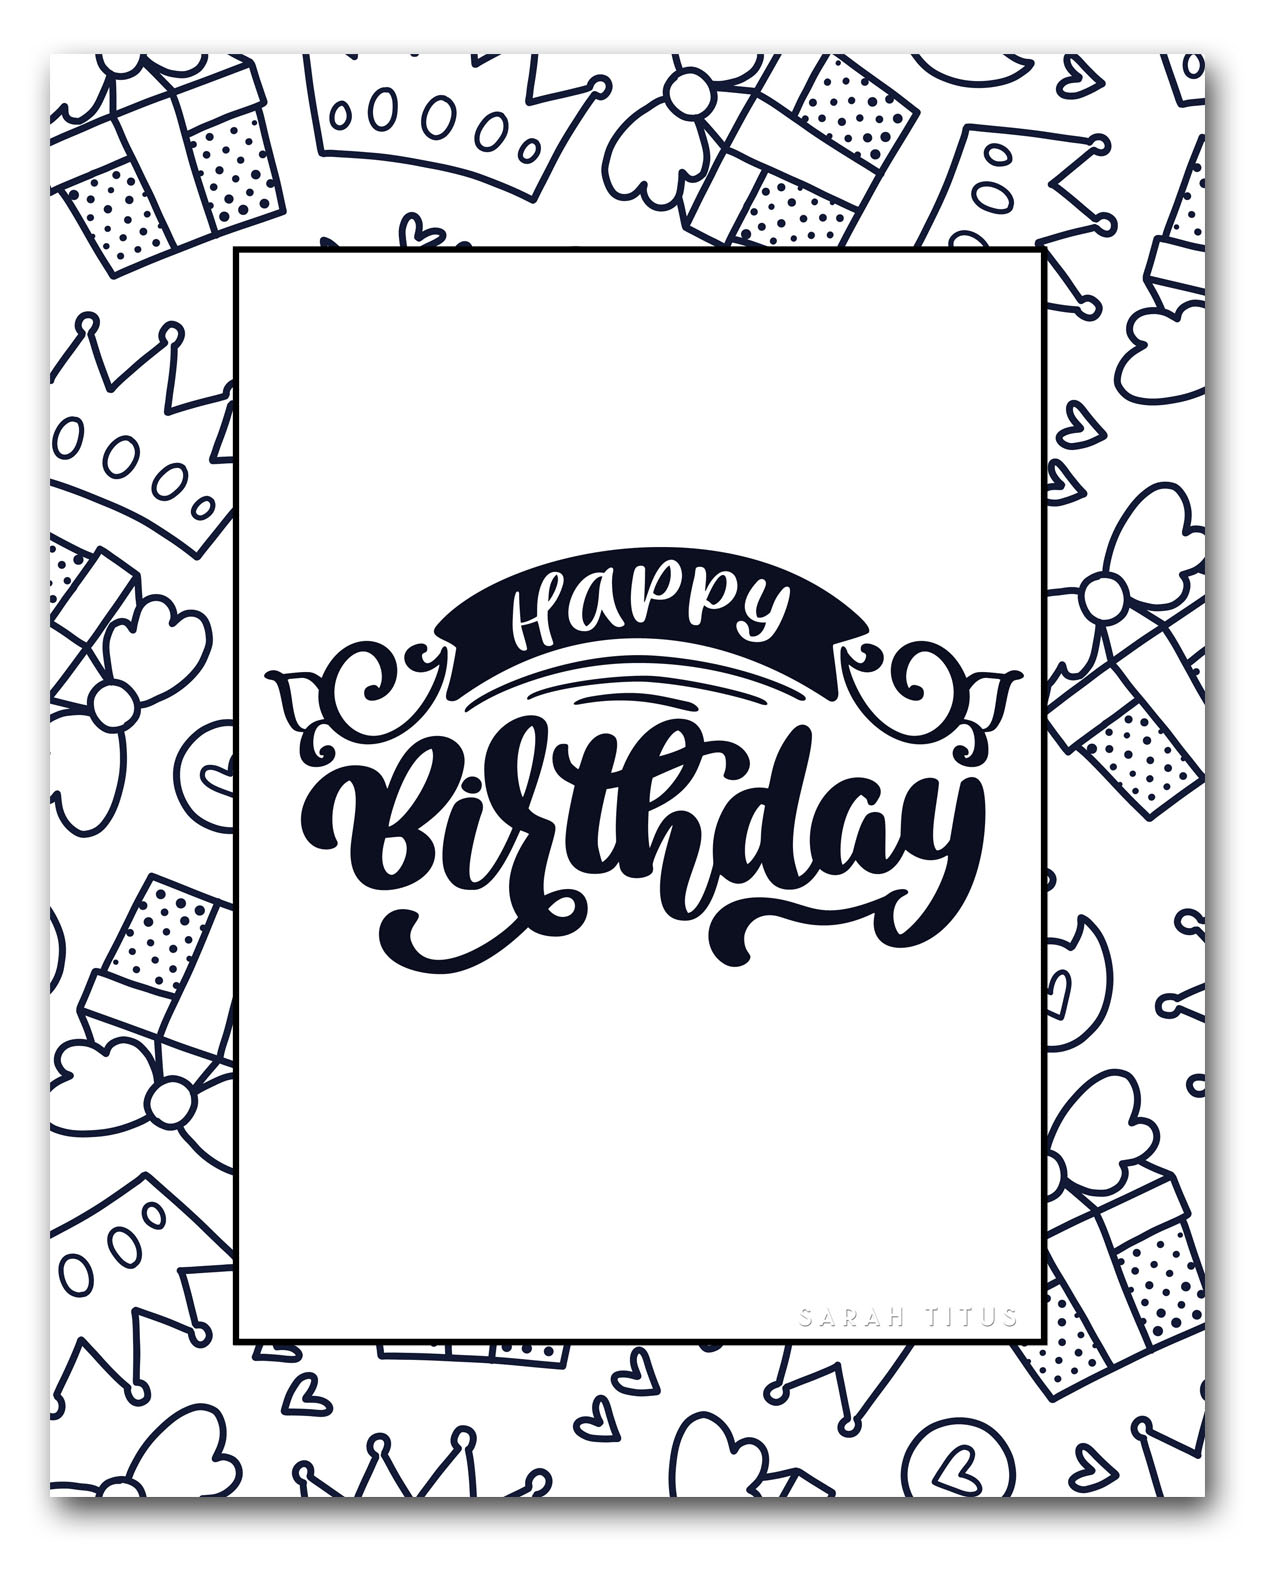 I LOVE coloring, don't you?  Here is a set of 5 different free printable happy birthday coloring sheets to color and give as gifts for the next birthday celebration or for your kids to color on their special day.  #happybirthday #freebirthday #freeprintable #coloringsheets #freecoloringsheets 